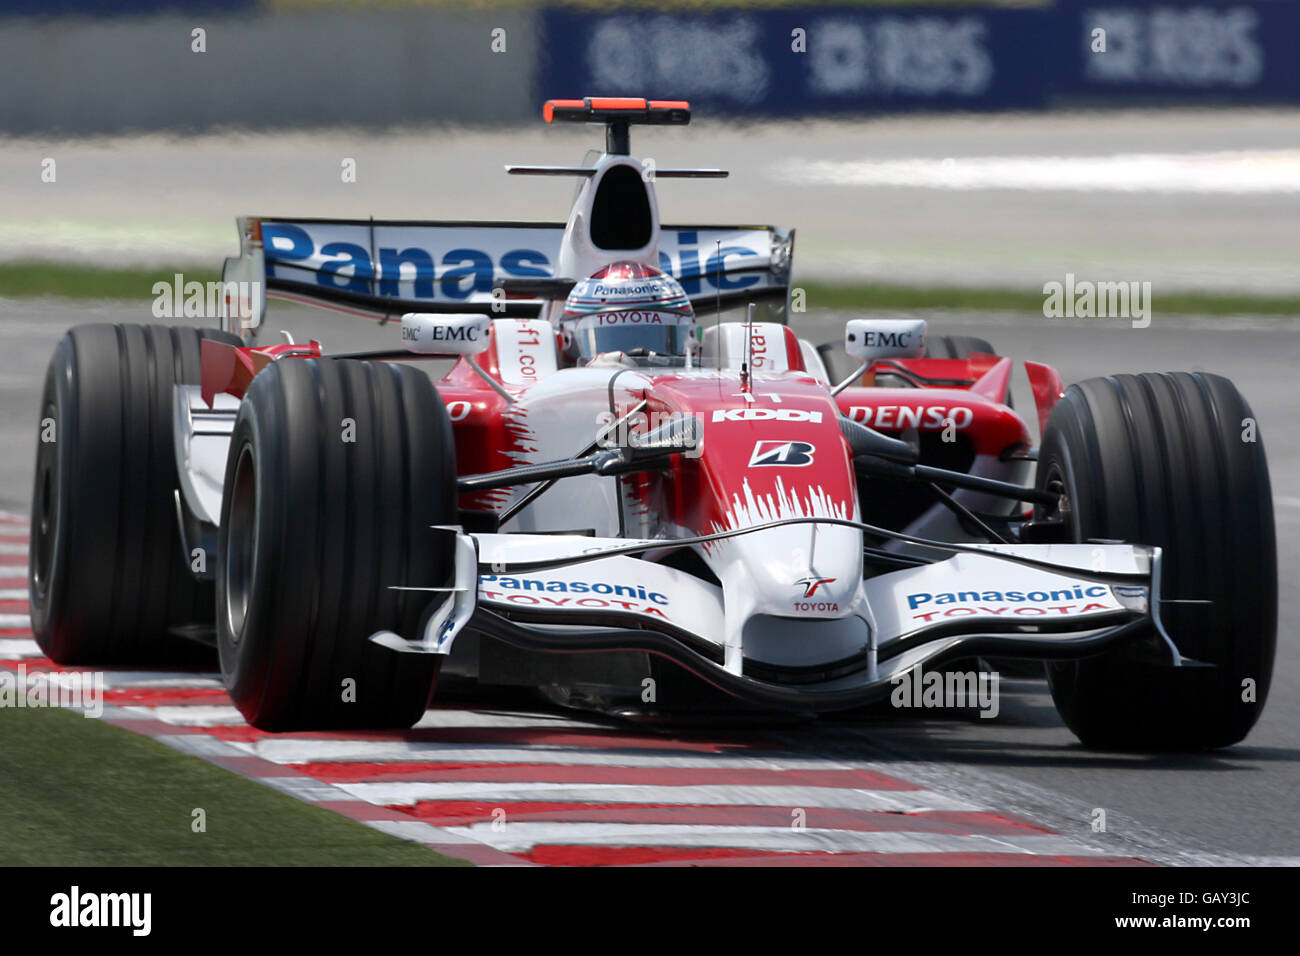 Formula One Motor Racing - French Grand Prix - Qualifying - Magny Cours. Toyota's Jarno Trulli during qualifying for the Grand Prix at Magny-Cours, Nevers, France. Stock Photo